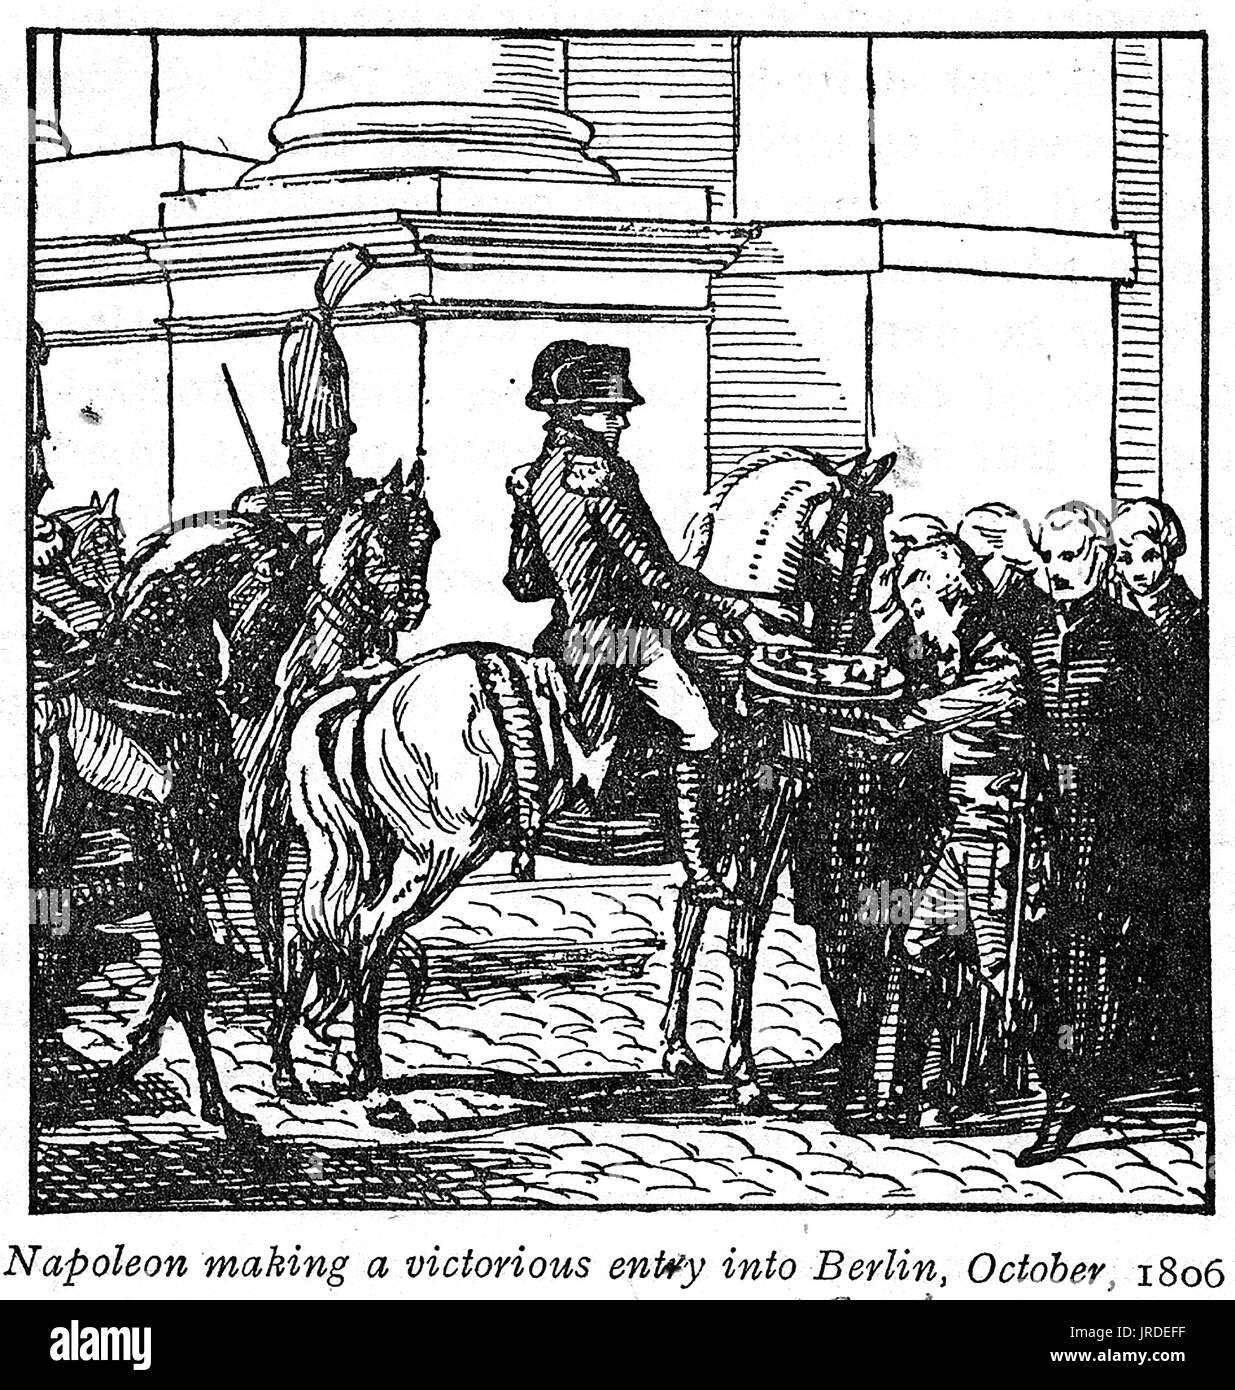 A 1926 illustration depicting Napoleon Bonaparte making a victorious entry into Berlin in October 1806. Stock Photo